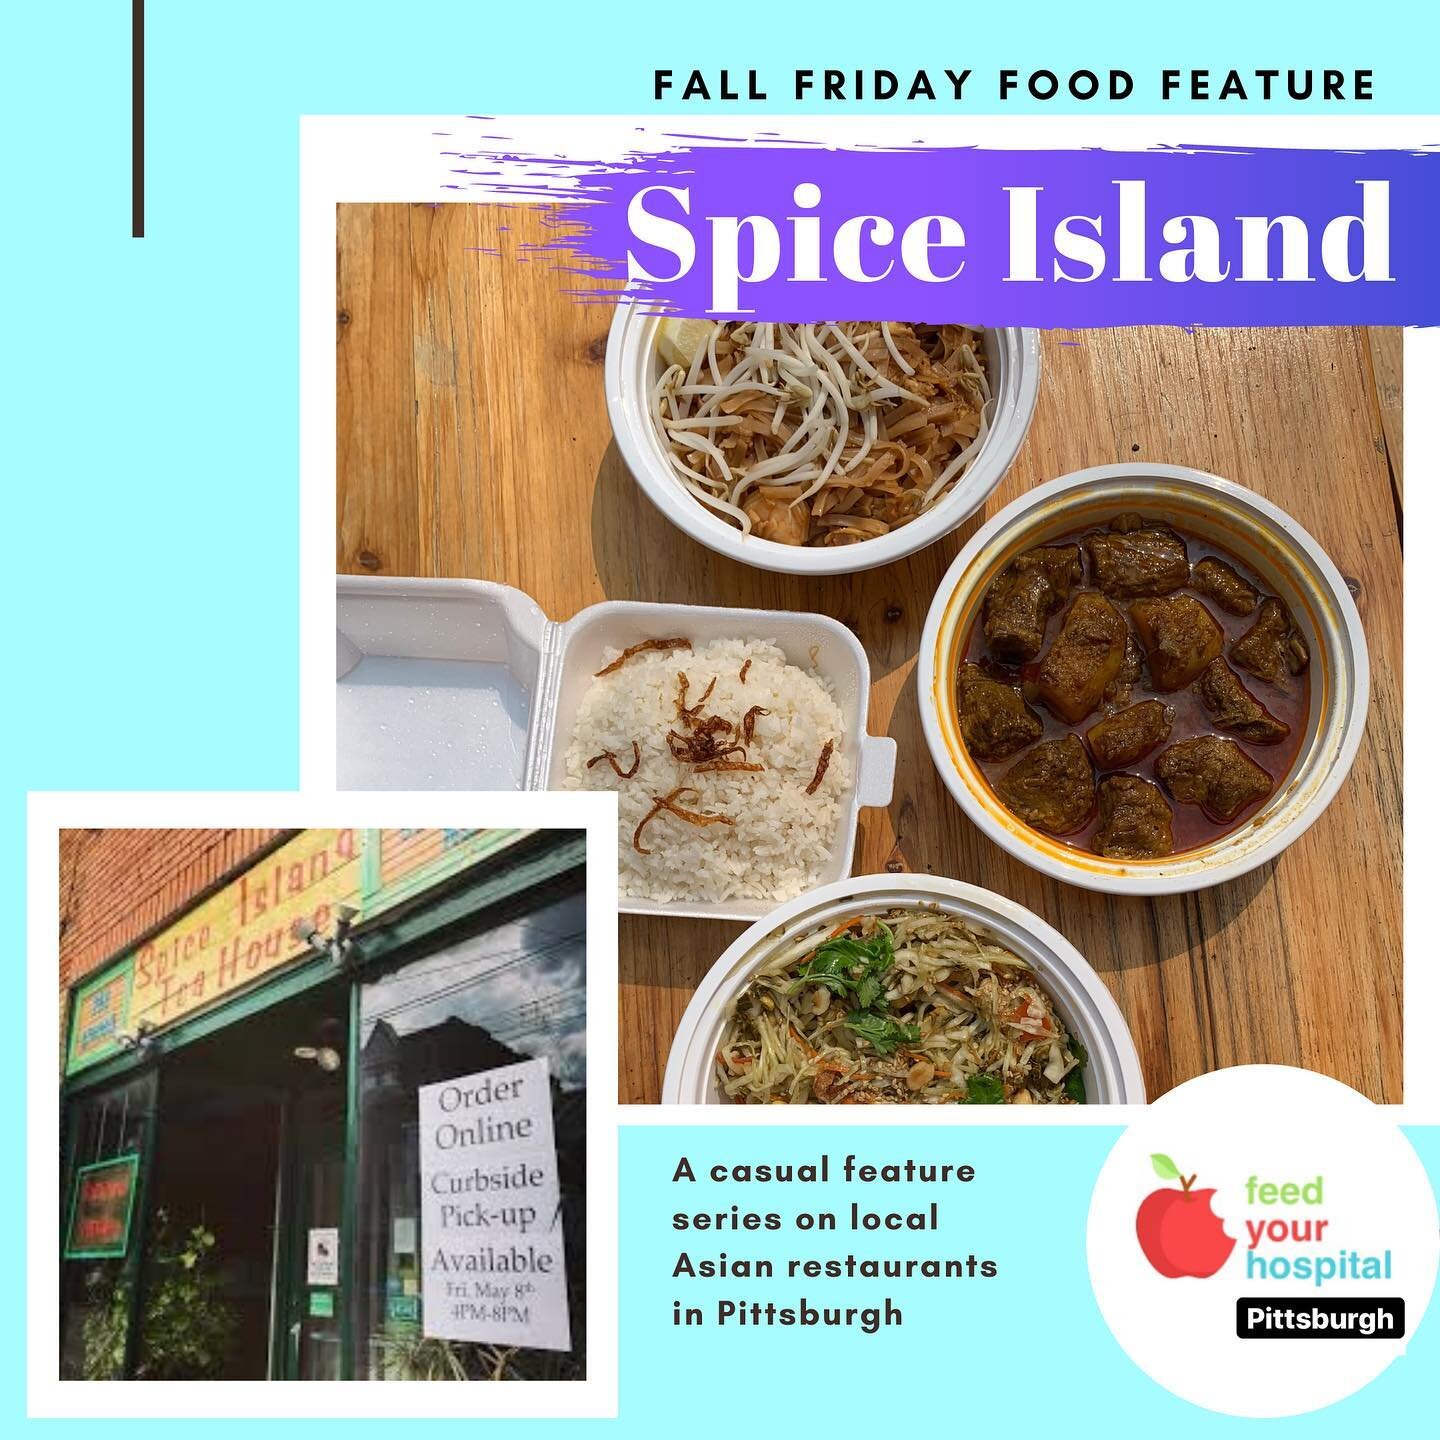 Get those dinner pre-orders innnn this is so good y&rsquo;all. 🍚 dishes pictured here: coconut rice, pad Thai with chicken and shrimp, Burmese pork curry, and Thai leaf salad 💞 link in our bio for how to order!!!

🍜
🍲
🍣
🍚
🍱
🥟
#pittsburgh #fee